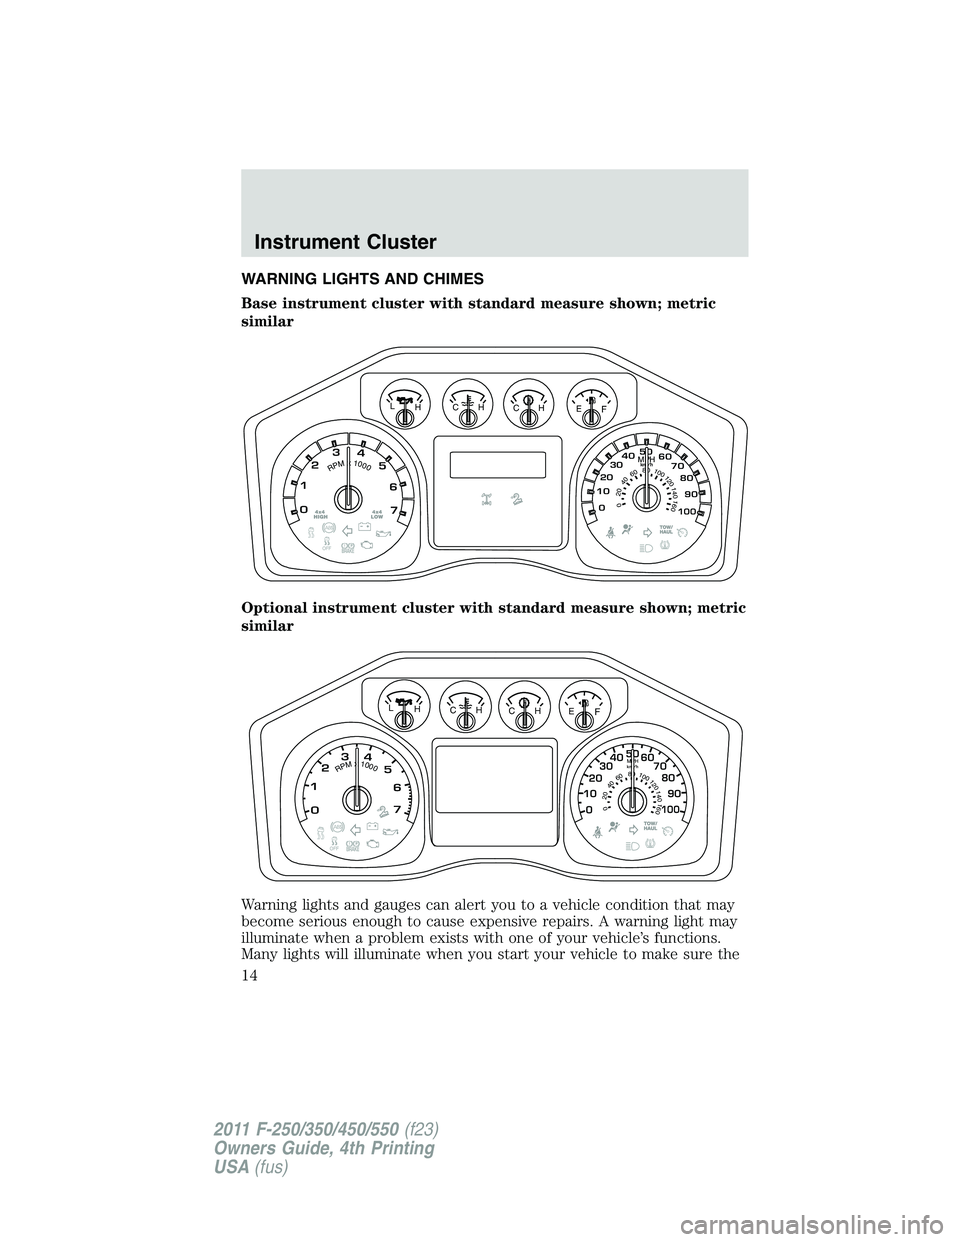 FORD F450 2011 User Guide WARNING LIGHTS AND CHIMES
Base instrument cluster with standard measure shown; metric
similar
Optional instrument cluster with standard measure shown; metric
similar
Warning lights and gauges can aler